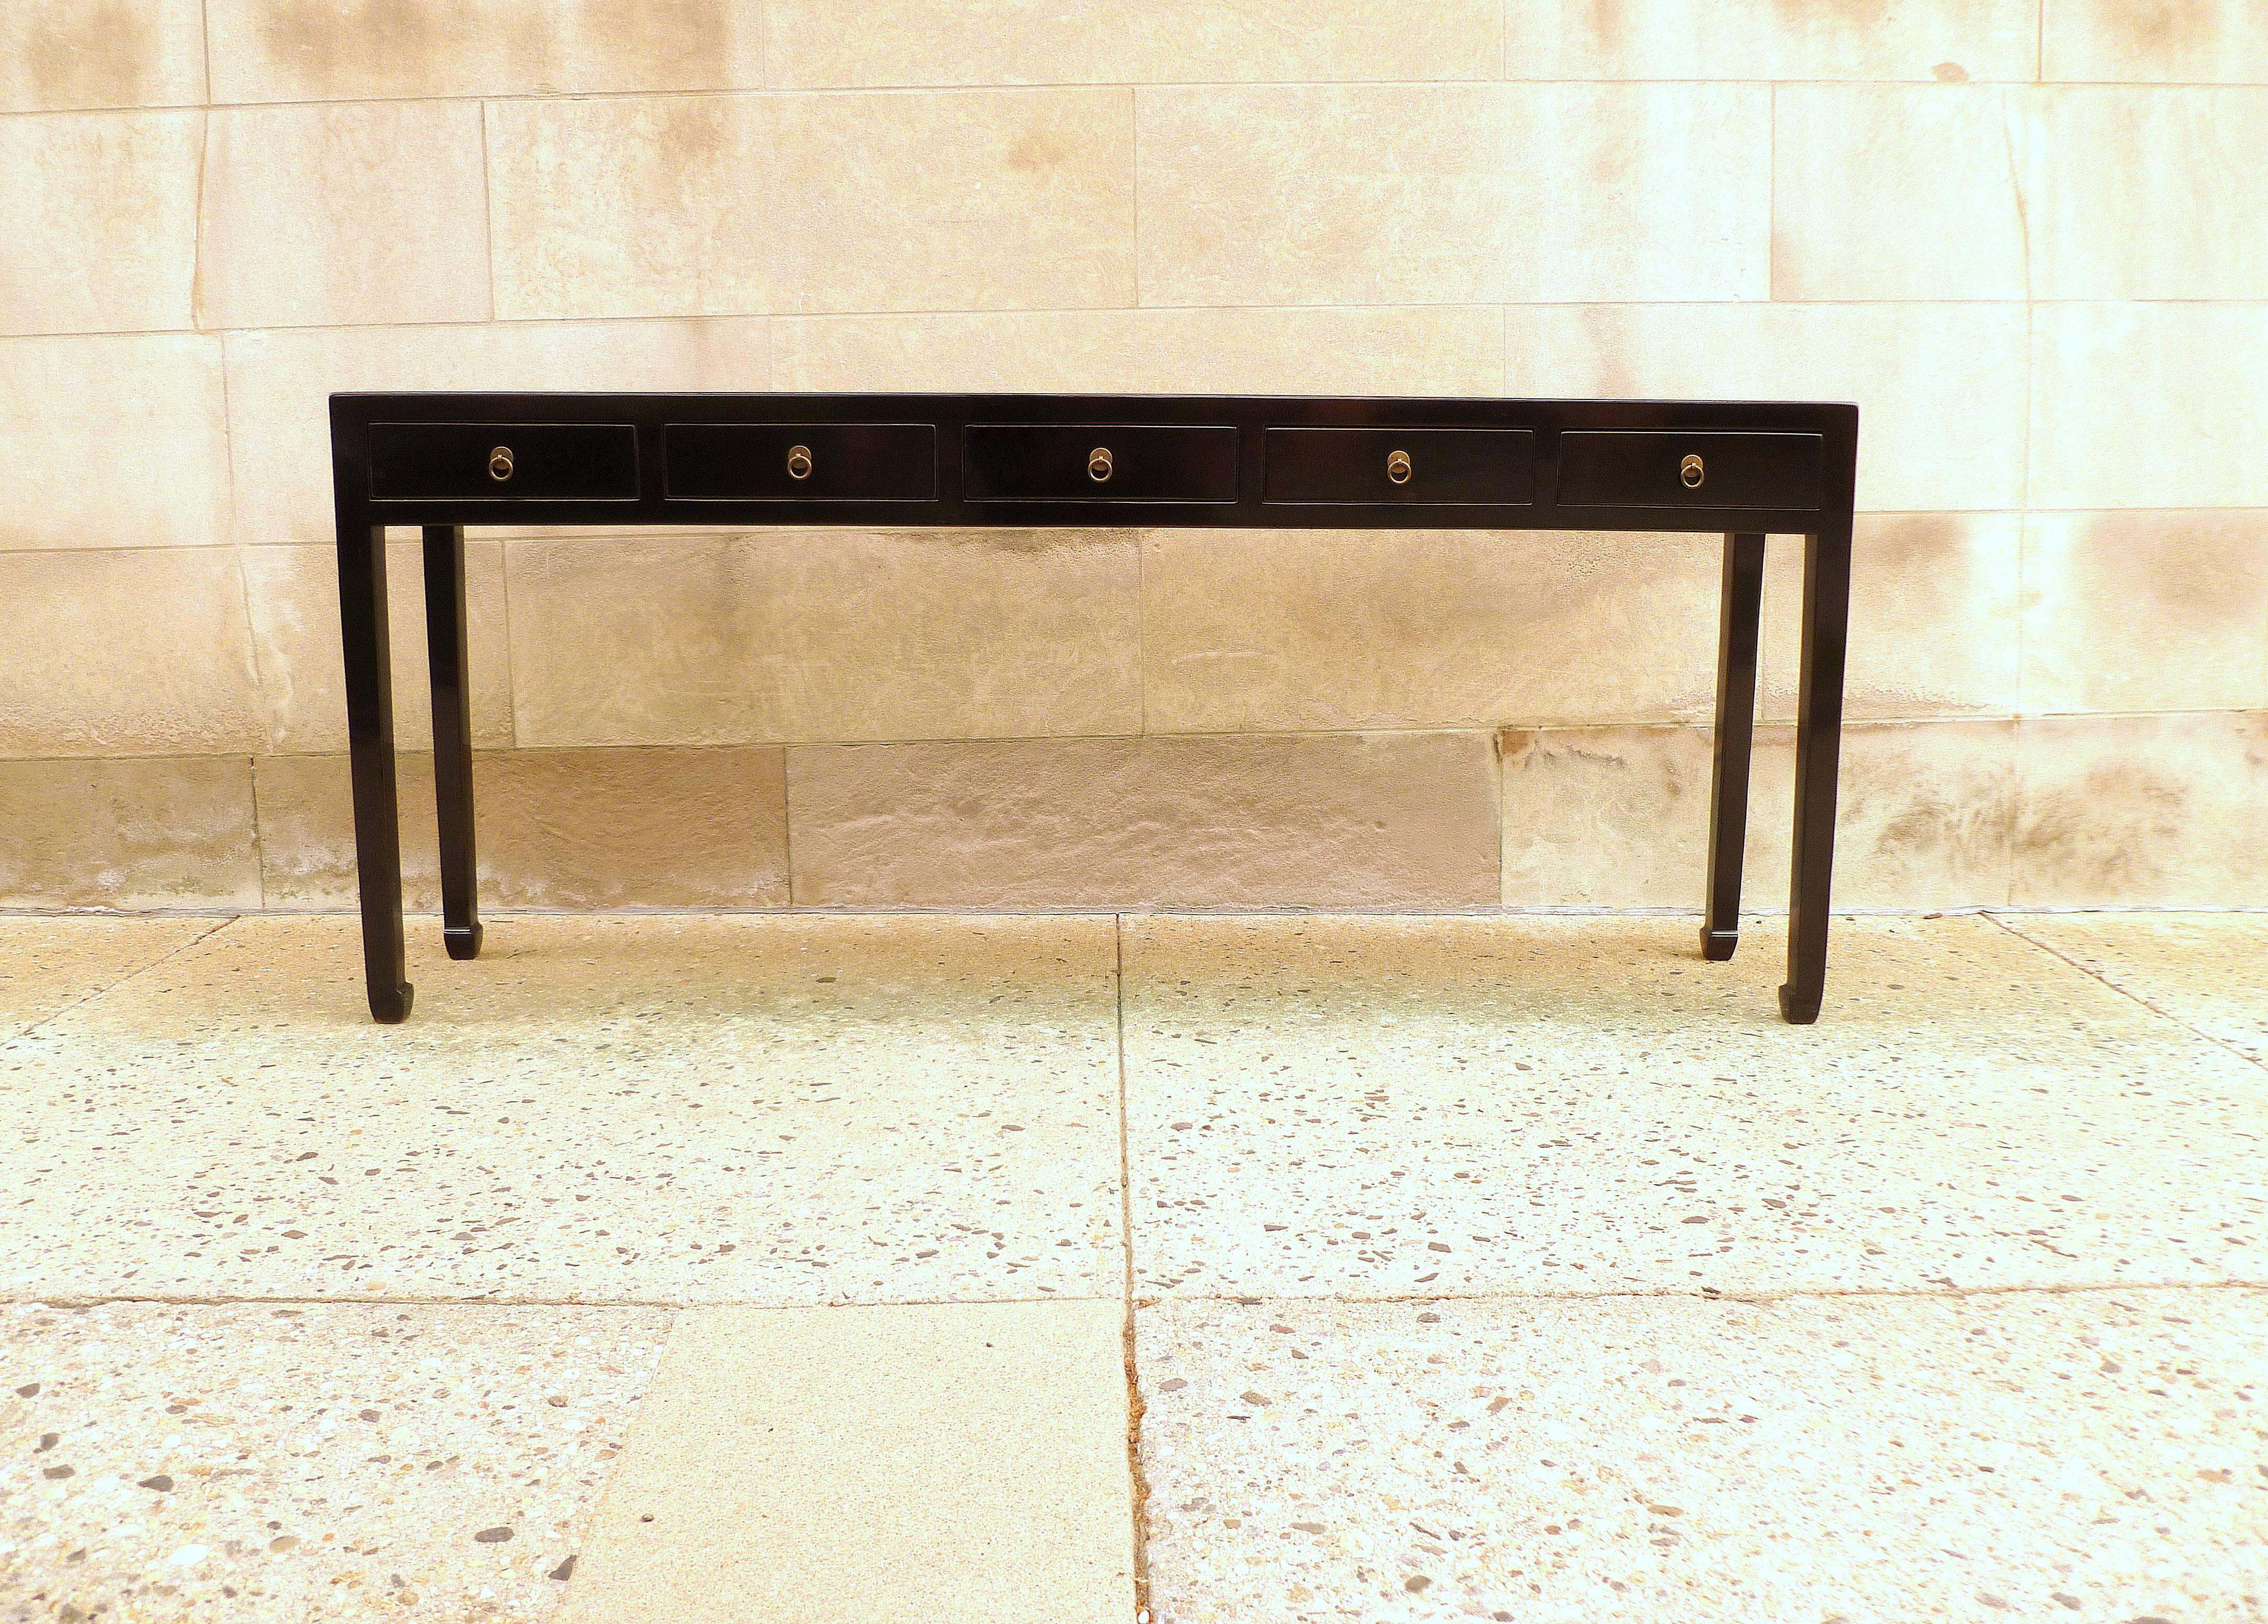 A fine black lacquer console table with five drawers, framed top supported by straight legs with drawers and brass ring pulls.